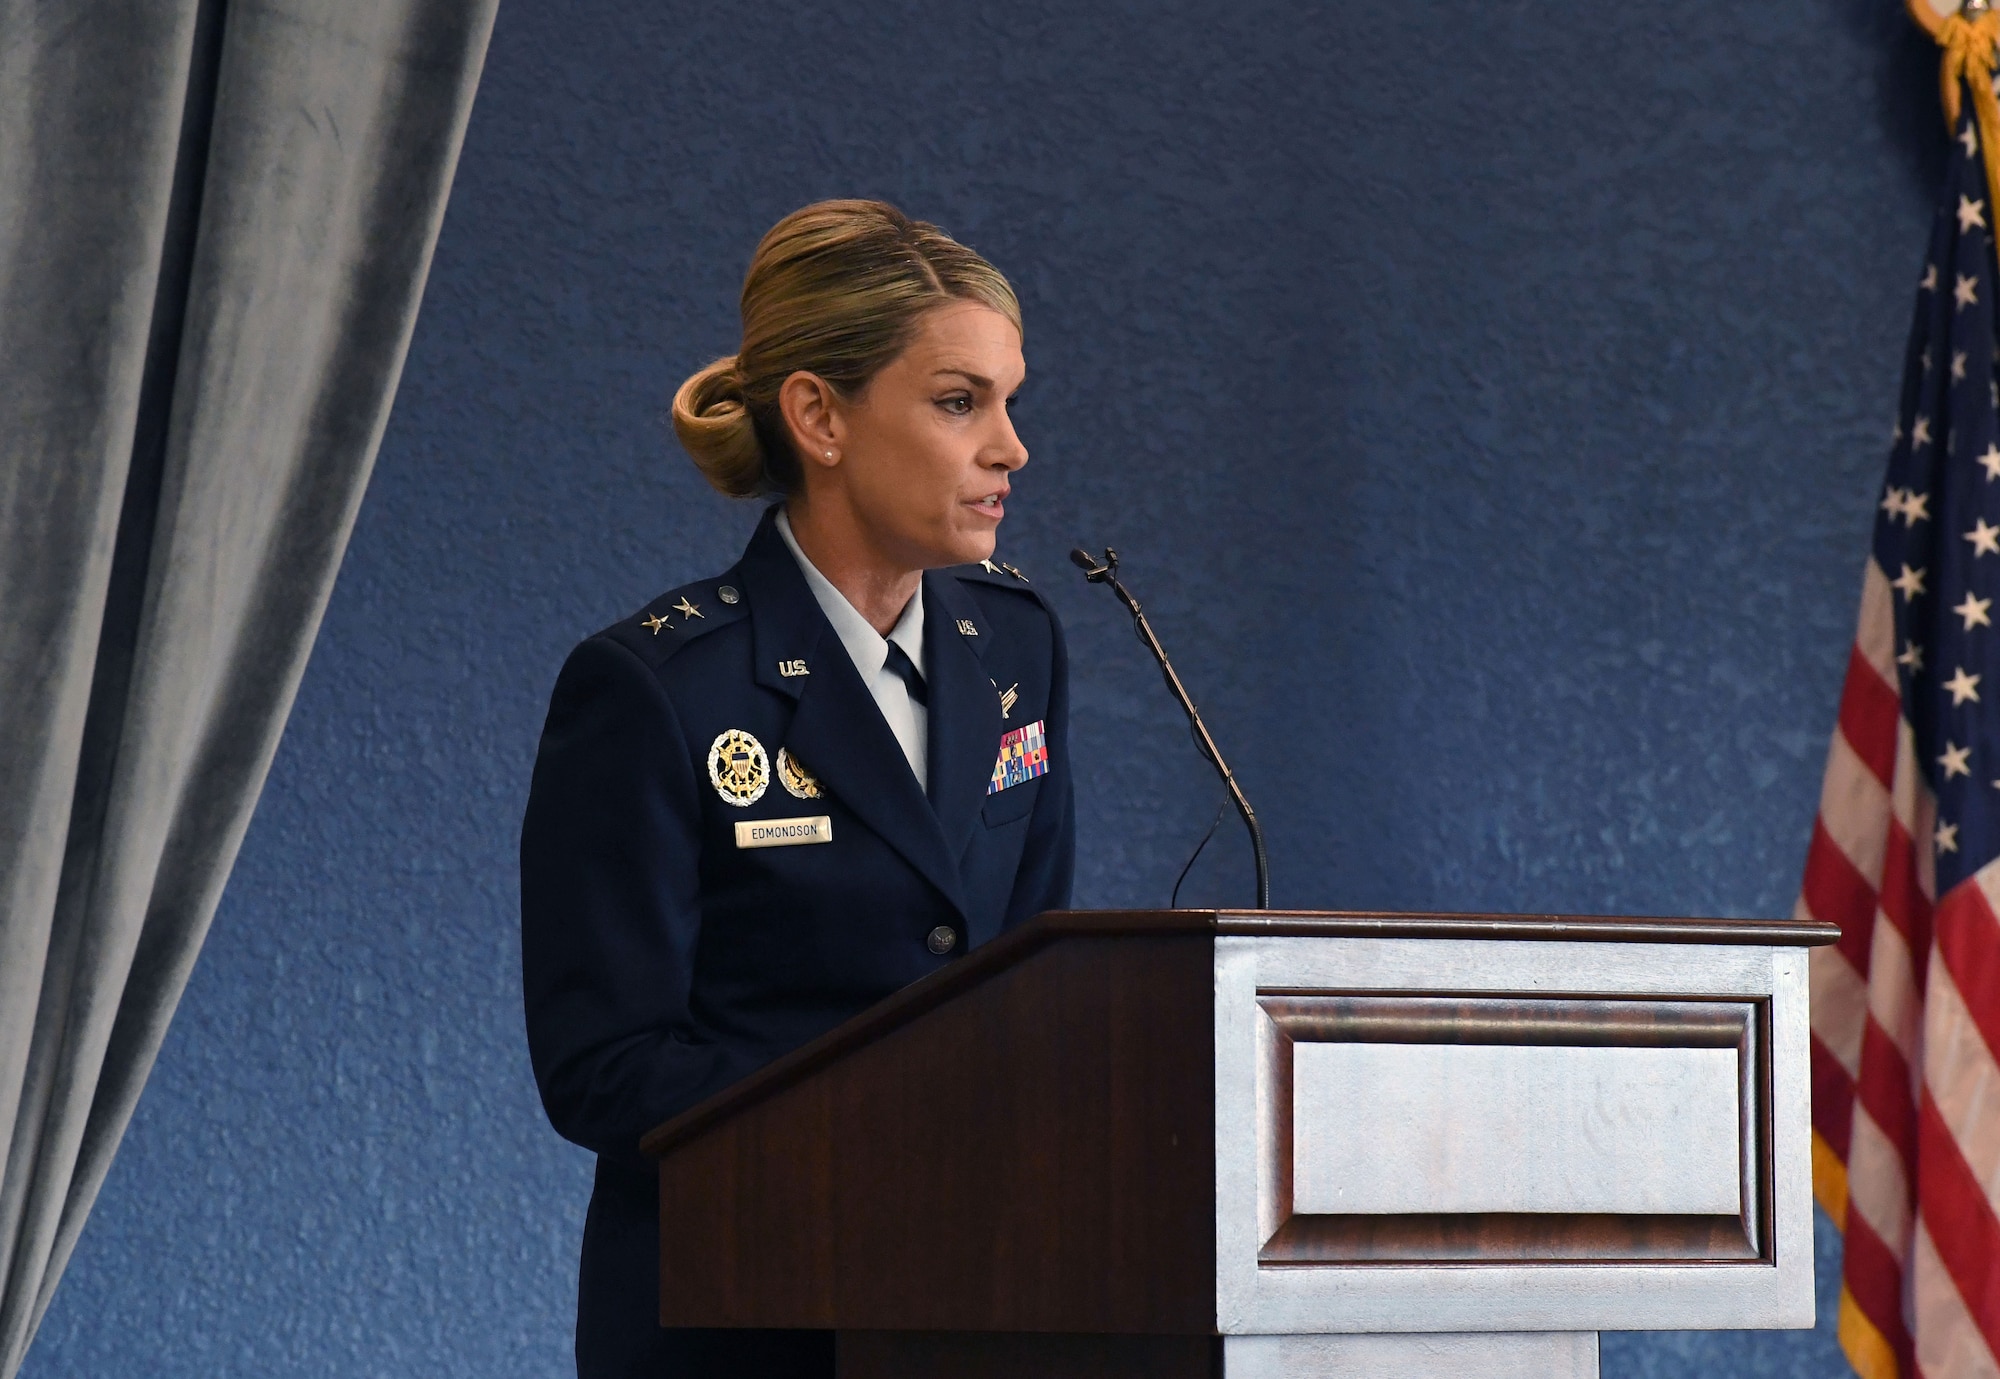 U.S. Air Force Maj. Gen. Michele Edmondson, Second Air Force commander, delivers remarks during the Second Air Force change of command ceremony inside the Bay Breeze Event Center at Keesler Air Force Base, Mississippi, July 30, 2021. The ceremony is a symbol of command being exchanged from one commander to the next. Edmondson assumed command of the Second Air Force from Maj. Gen. Andrea Tullos. (U.S. Air Force photo by Kemberly Groue)